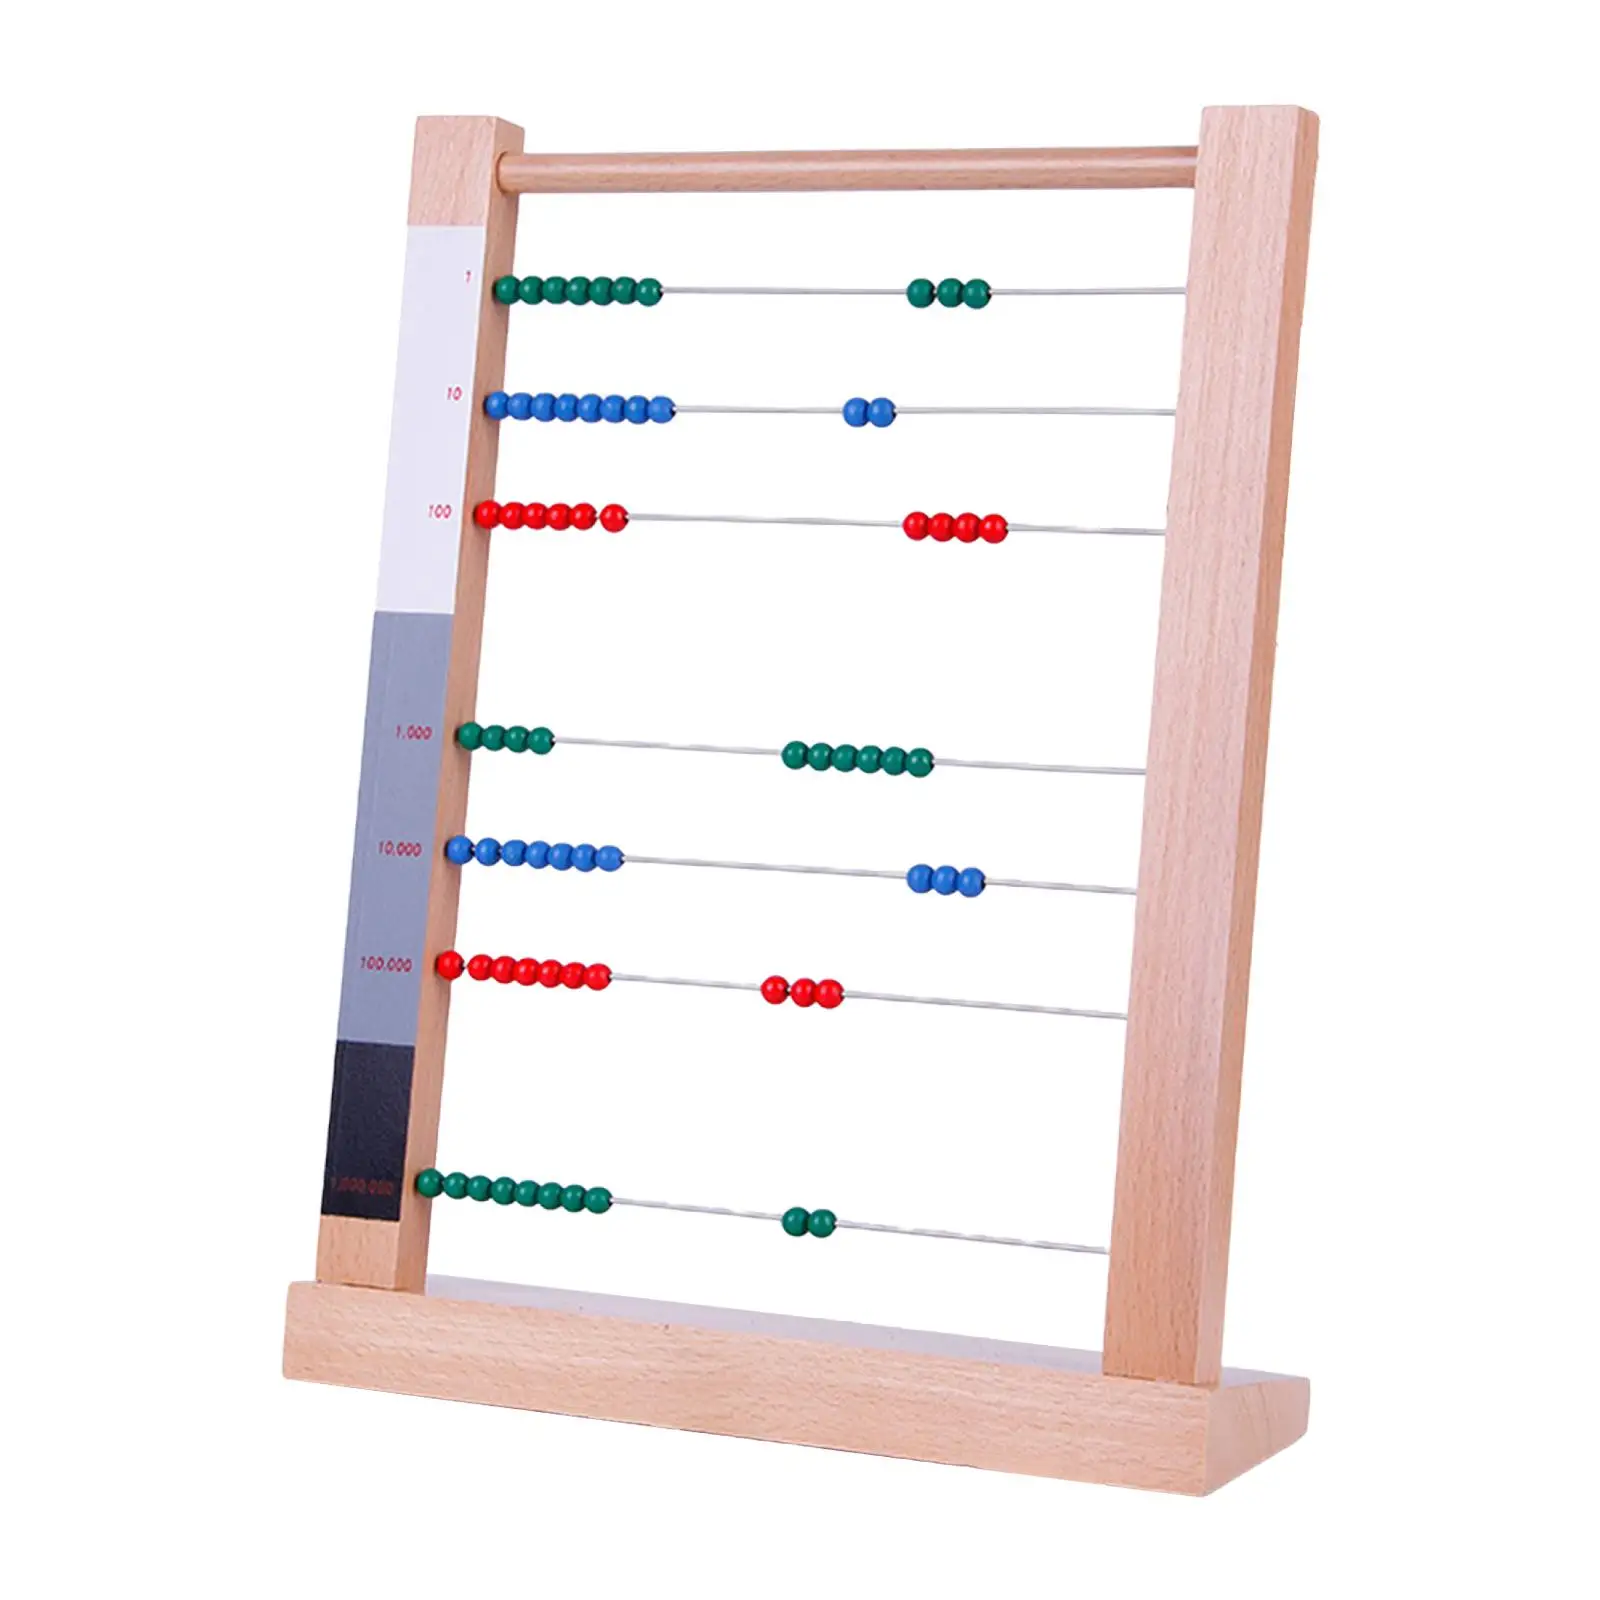 Wooden Abacus Wooden Small Bead Frame Mathematics Abacus 7 Rows Counting Frame for Preschool